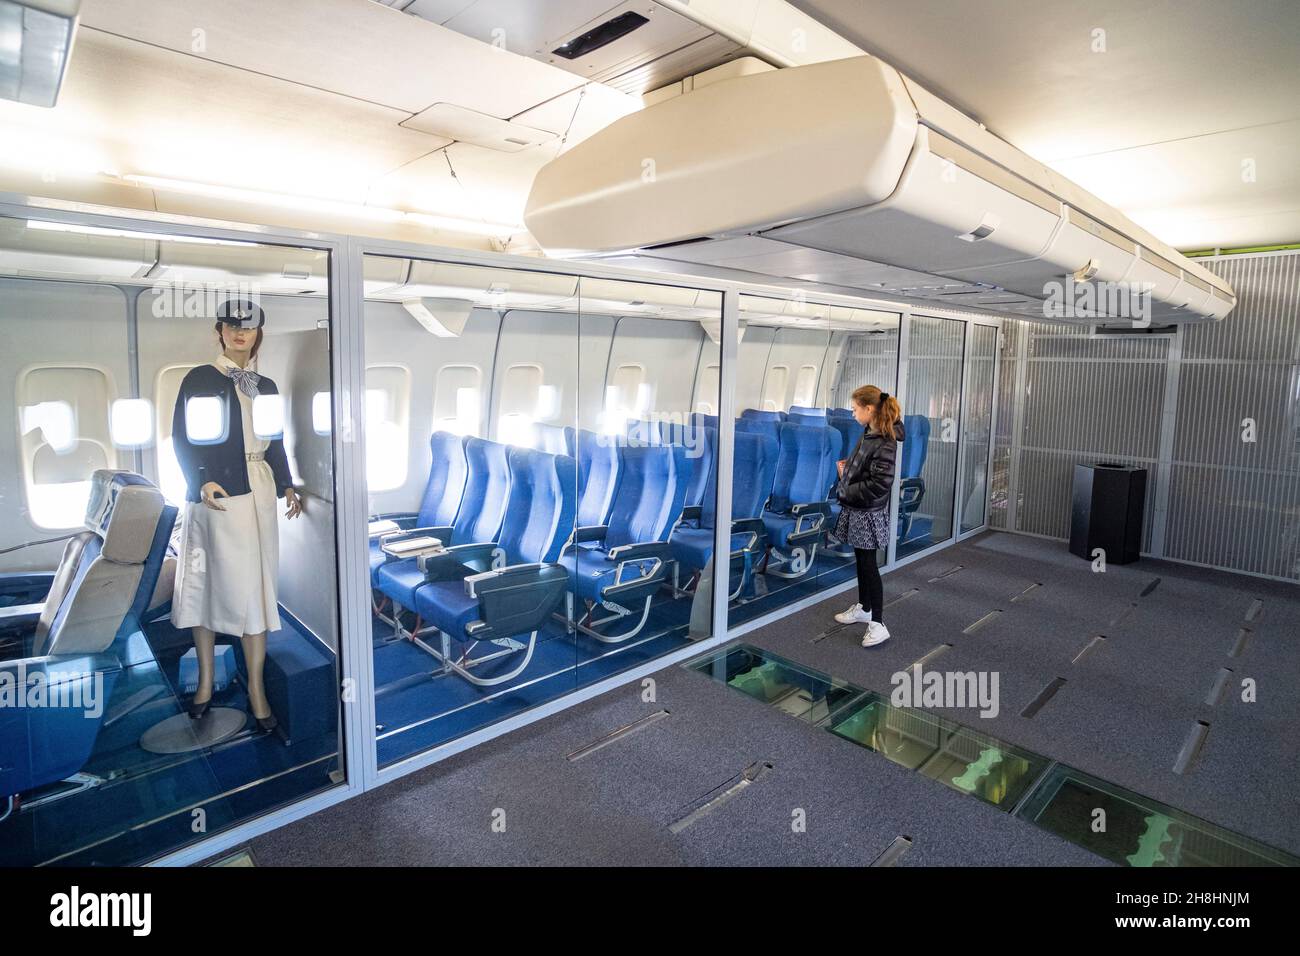 France, Seine Saint Denis, Le Bourget, Air and Space museum, interior of a Boeing 747 Stock Photo